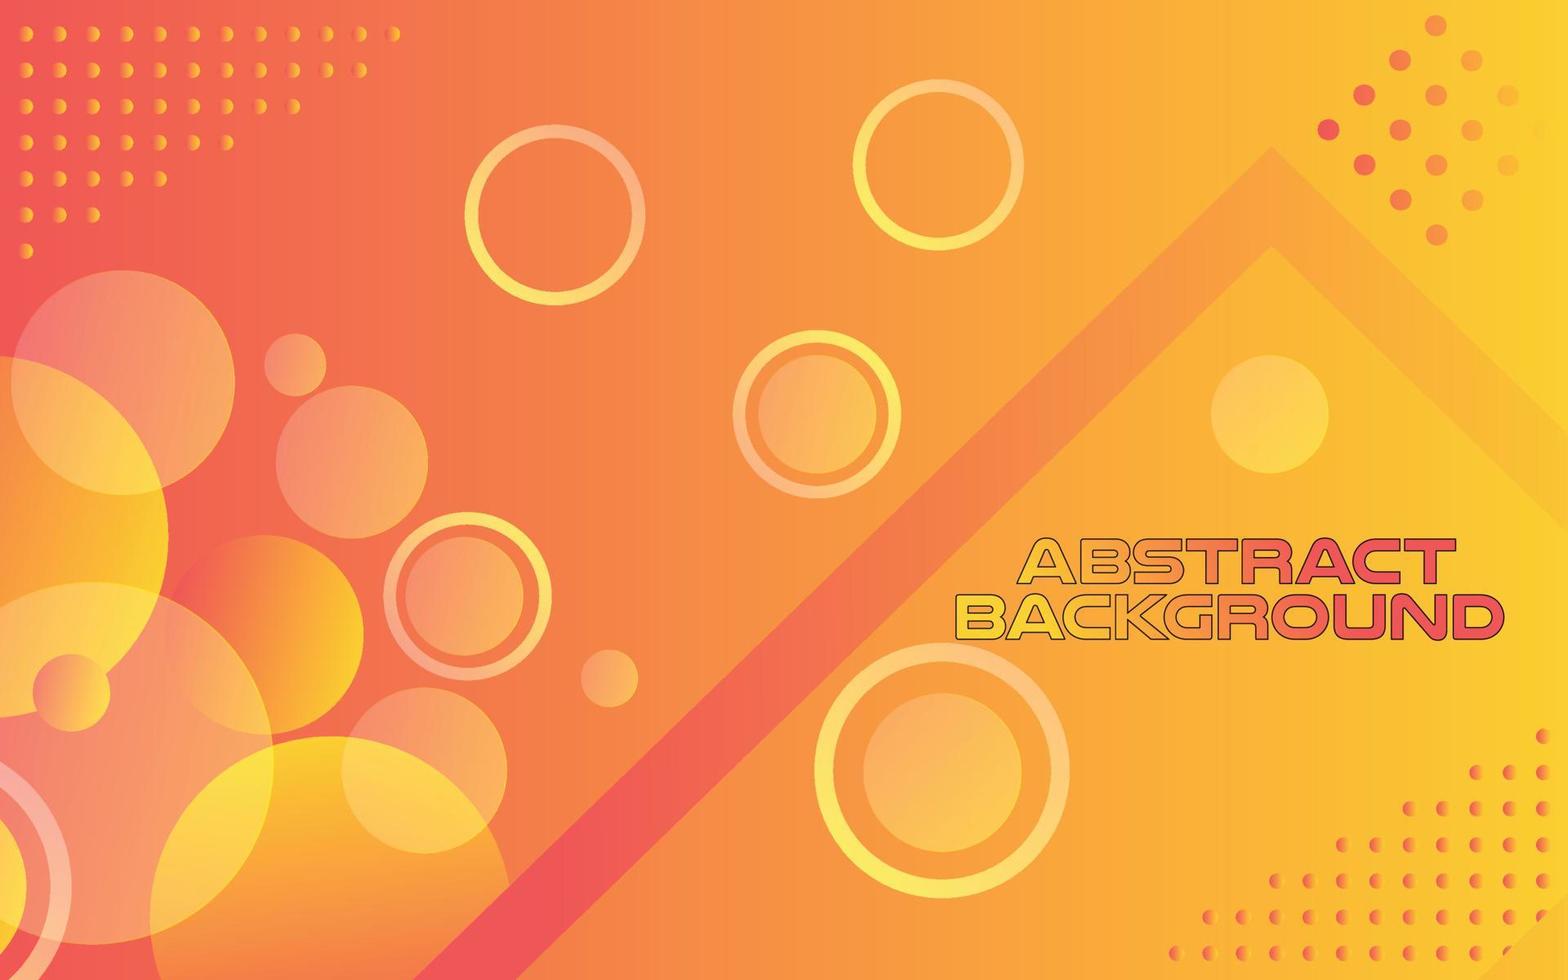 These are the Abstract Backgrounds vector